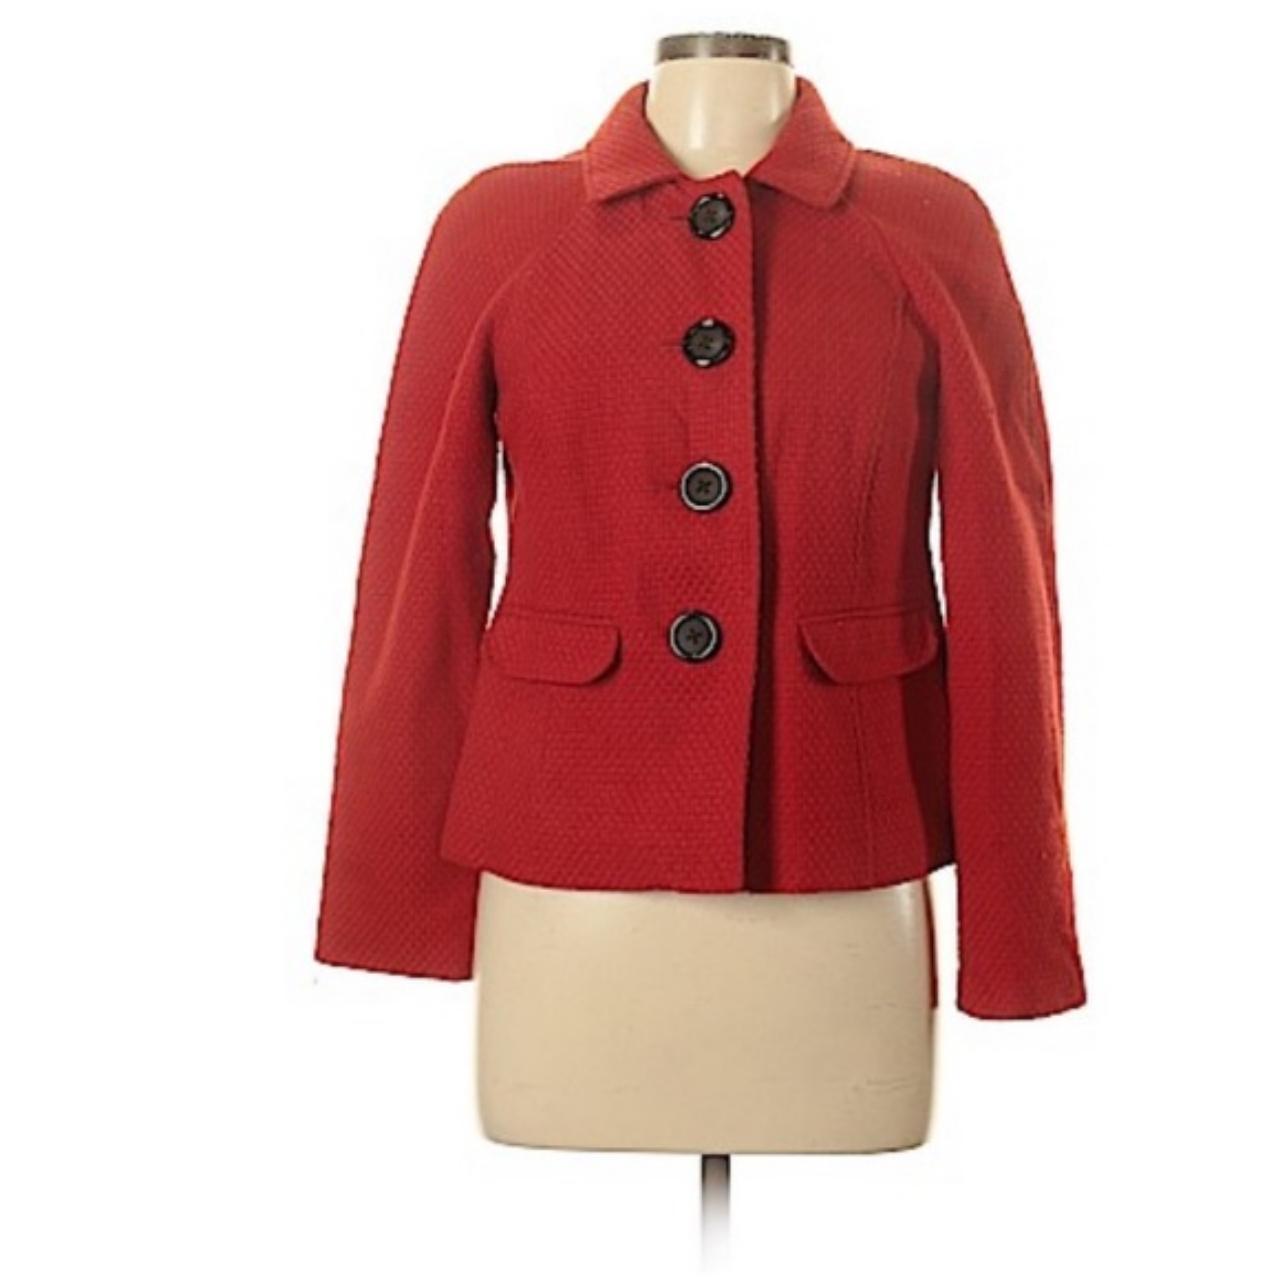 Women's Red and Black Coat